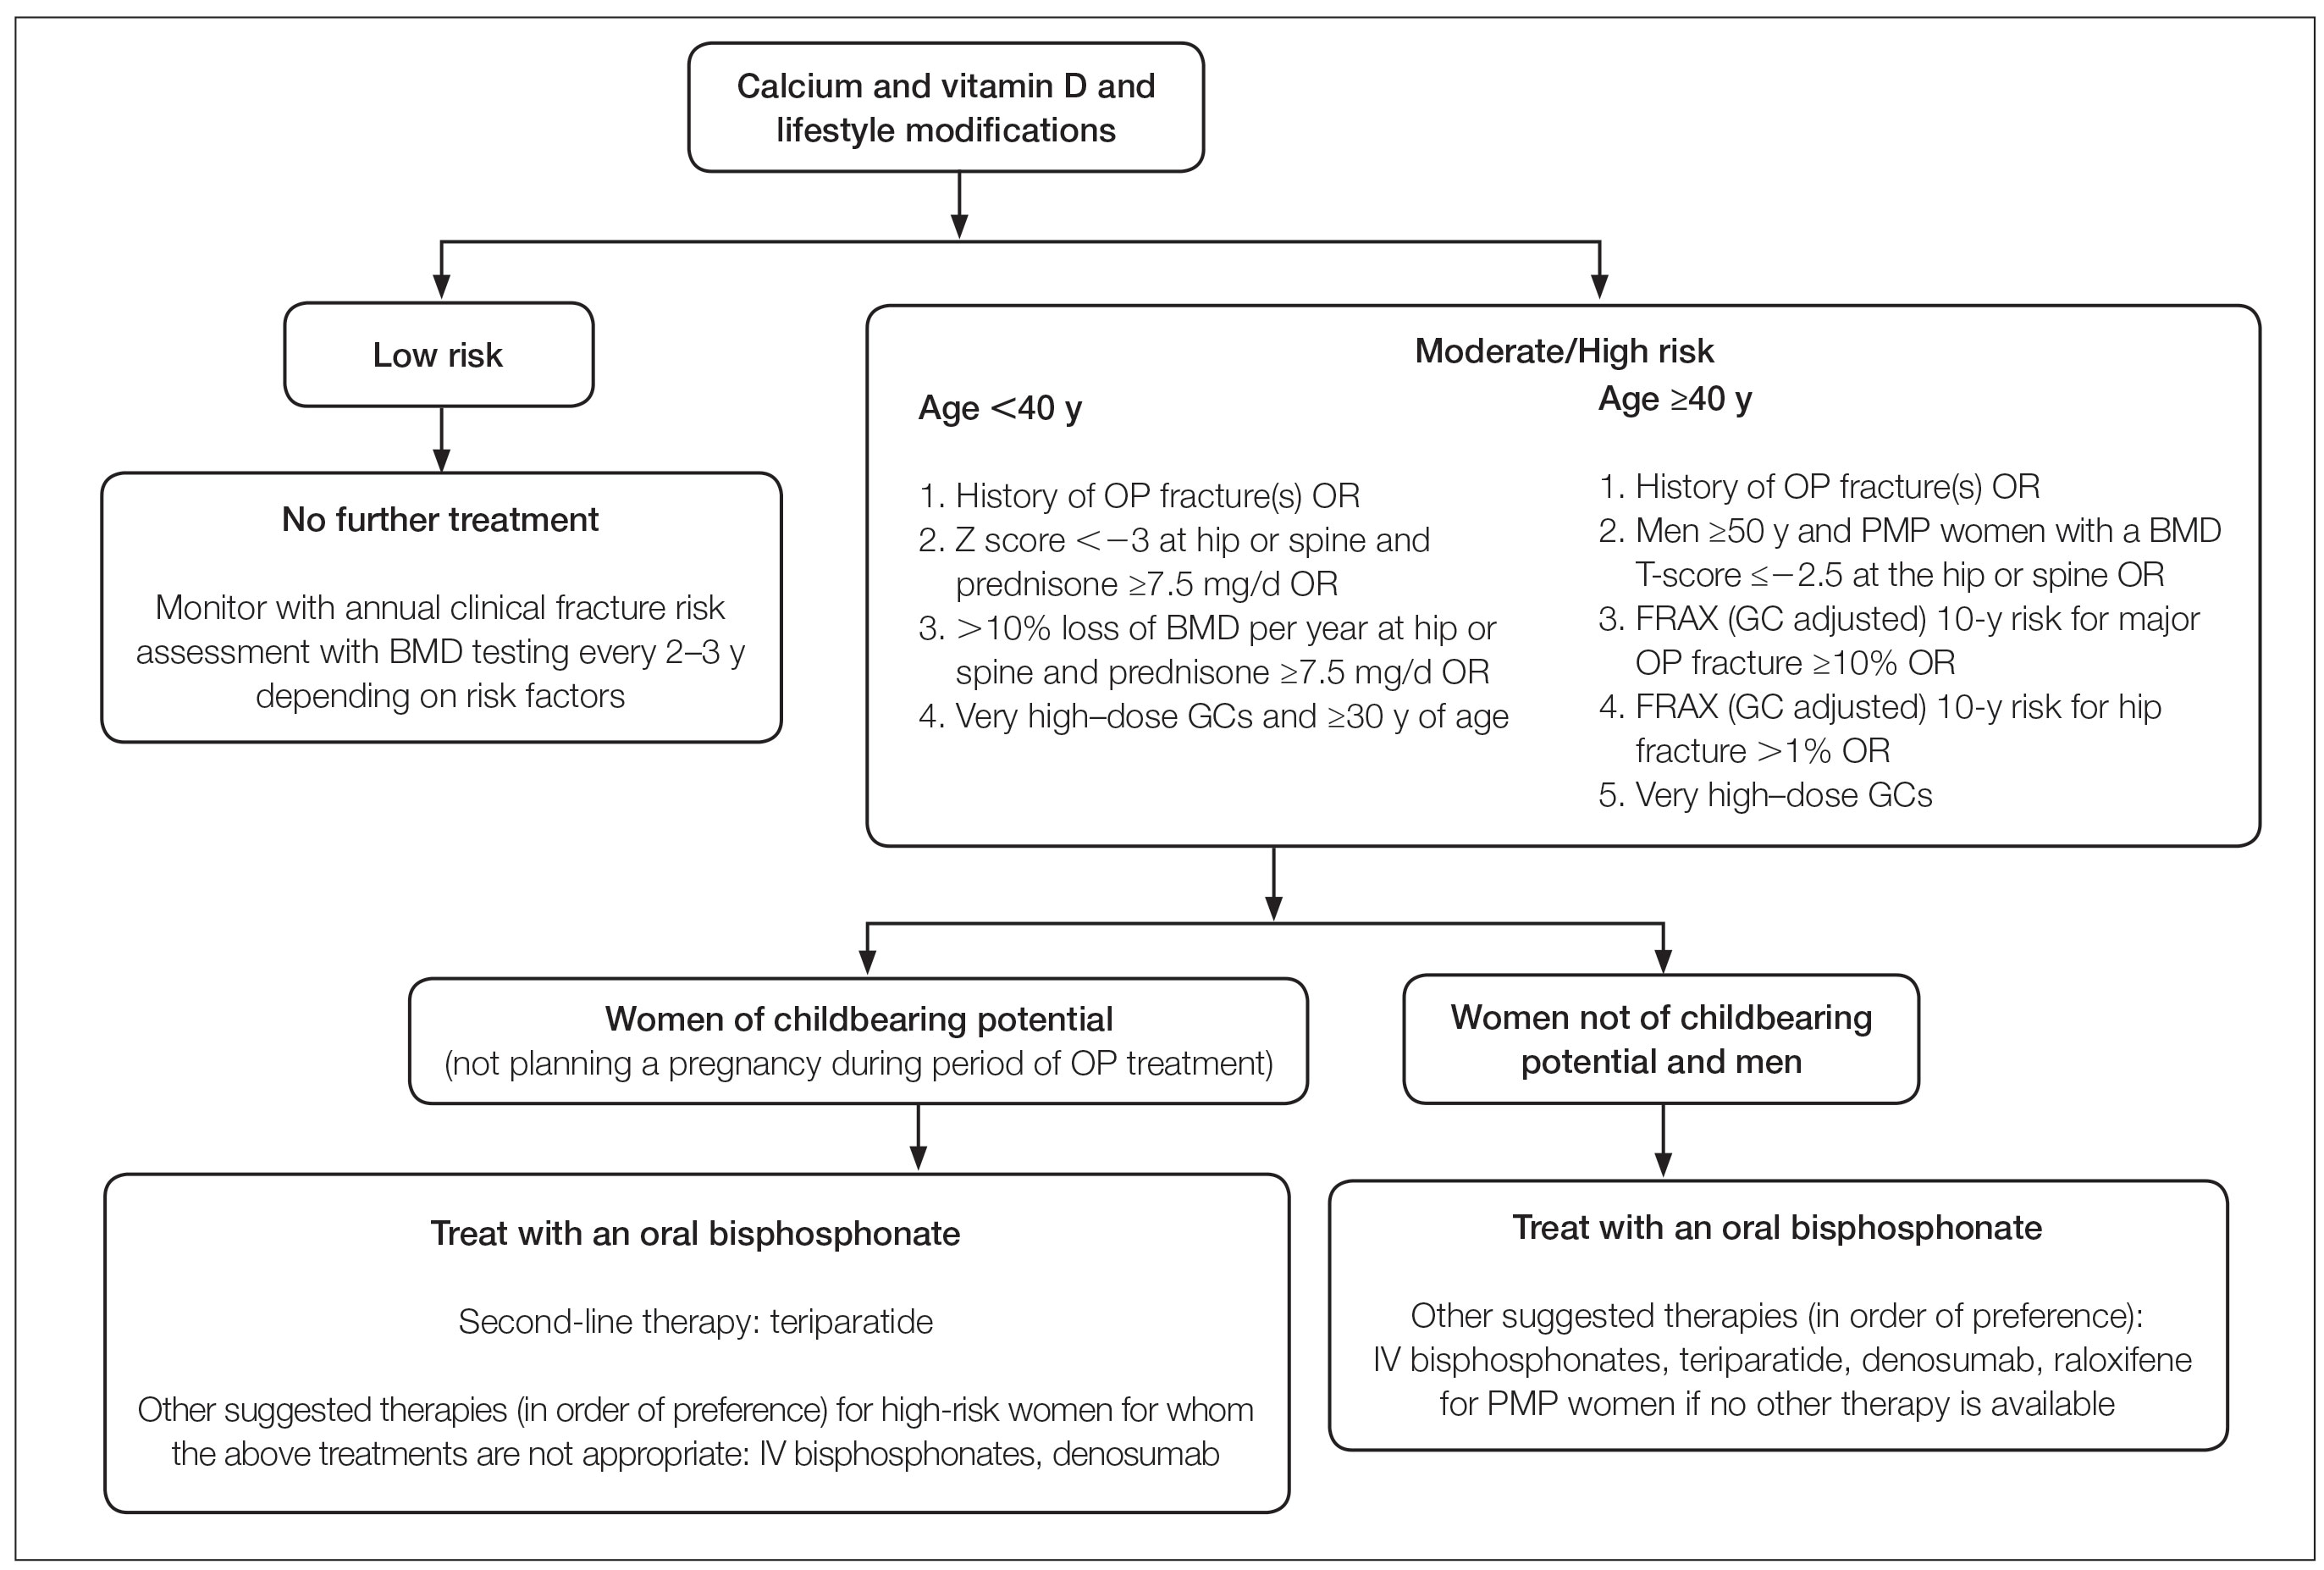 Therapeutic algorithm for adults treated with glucocorticoids (GCs)